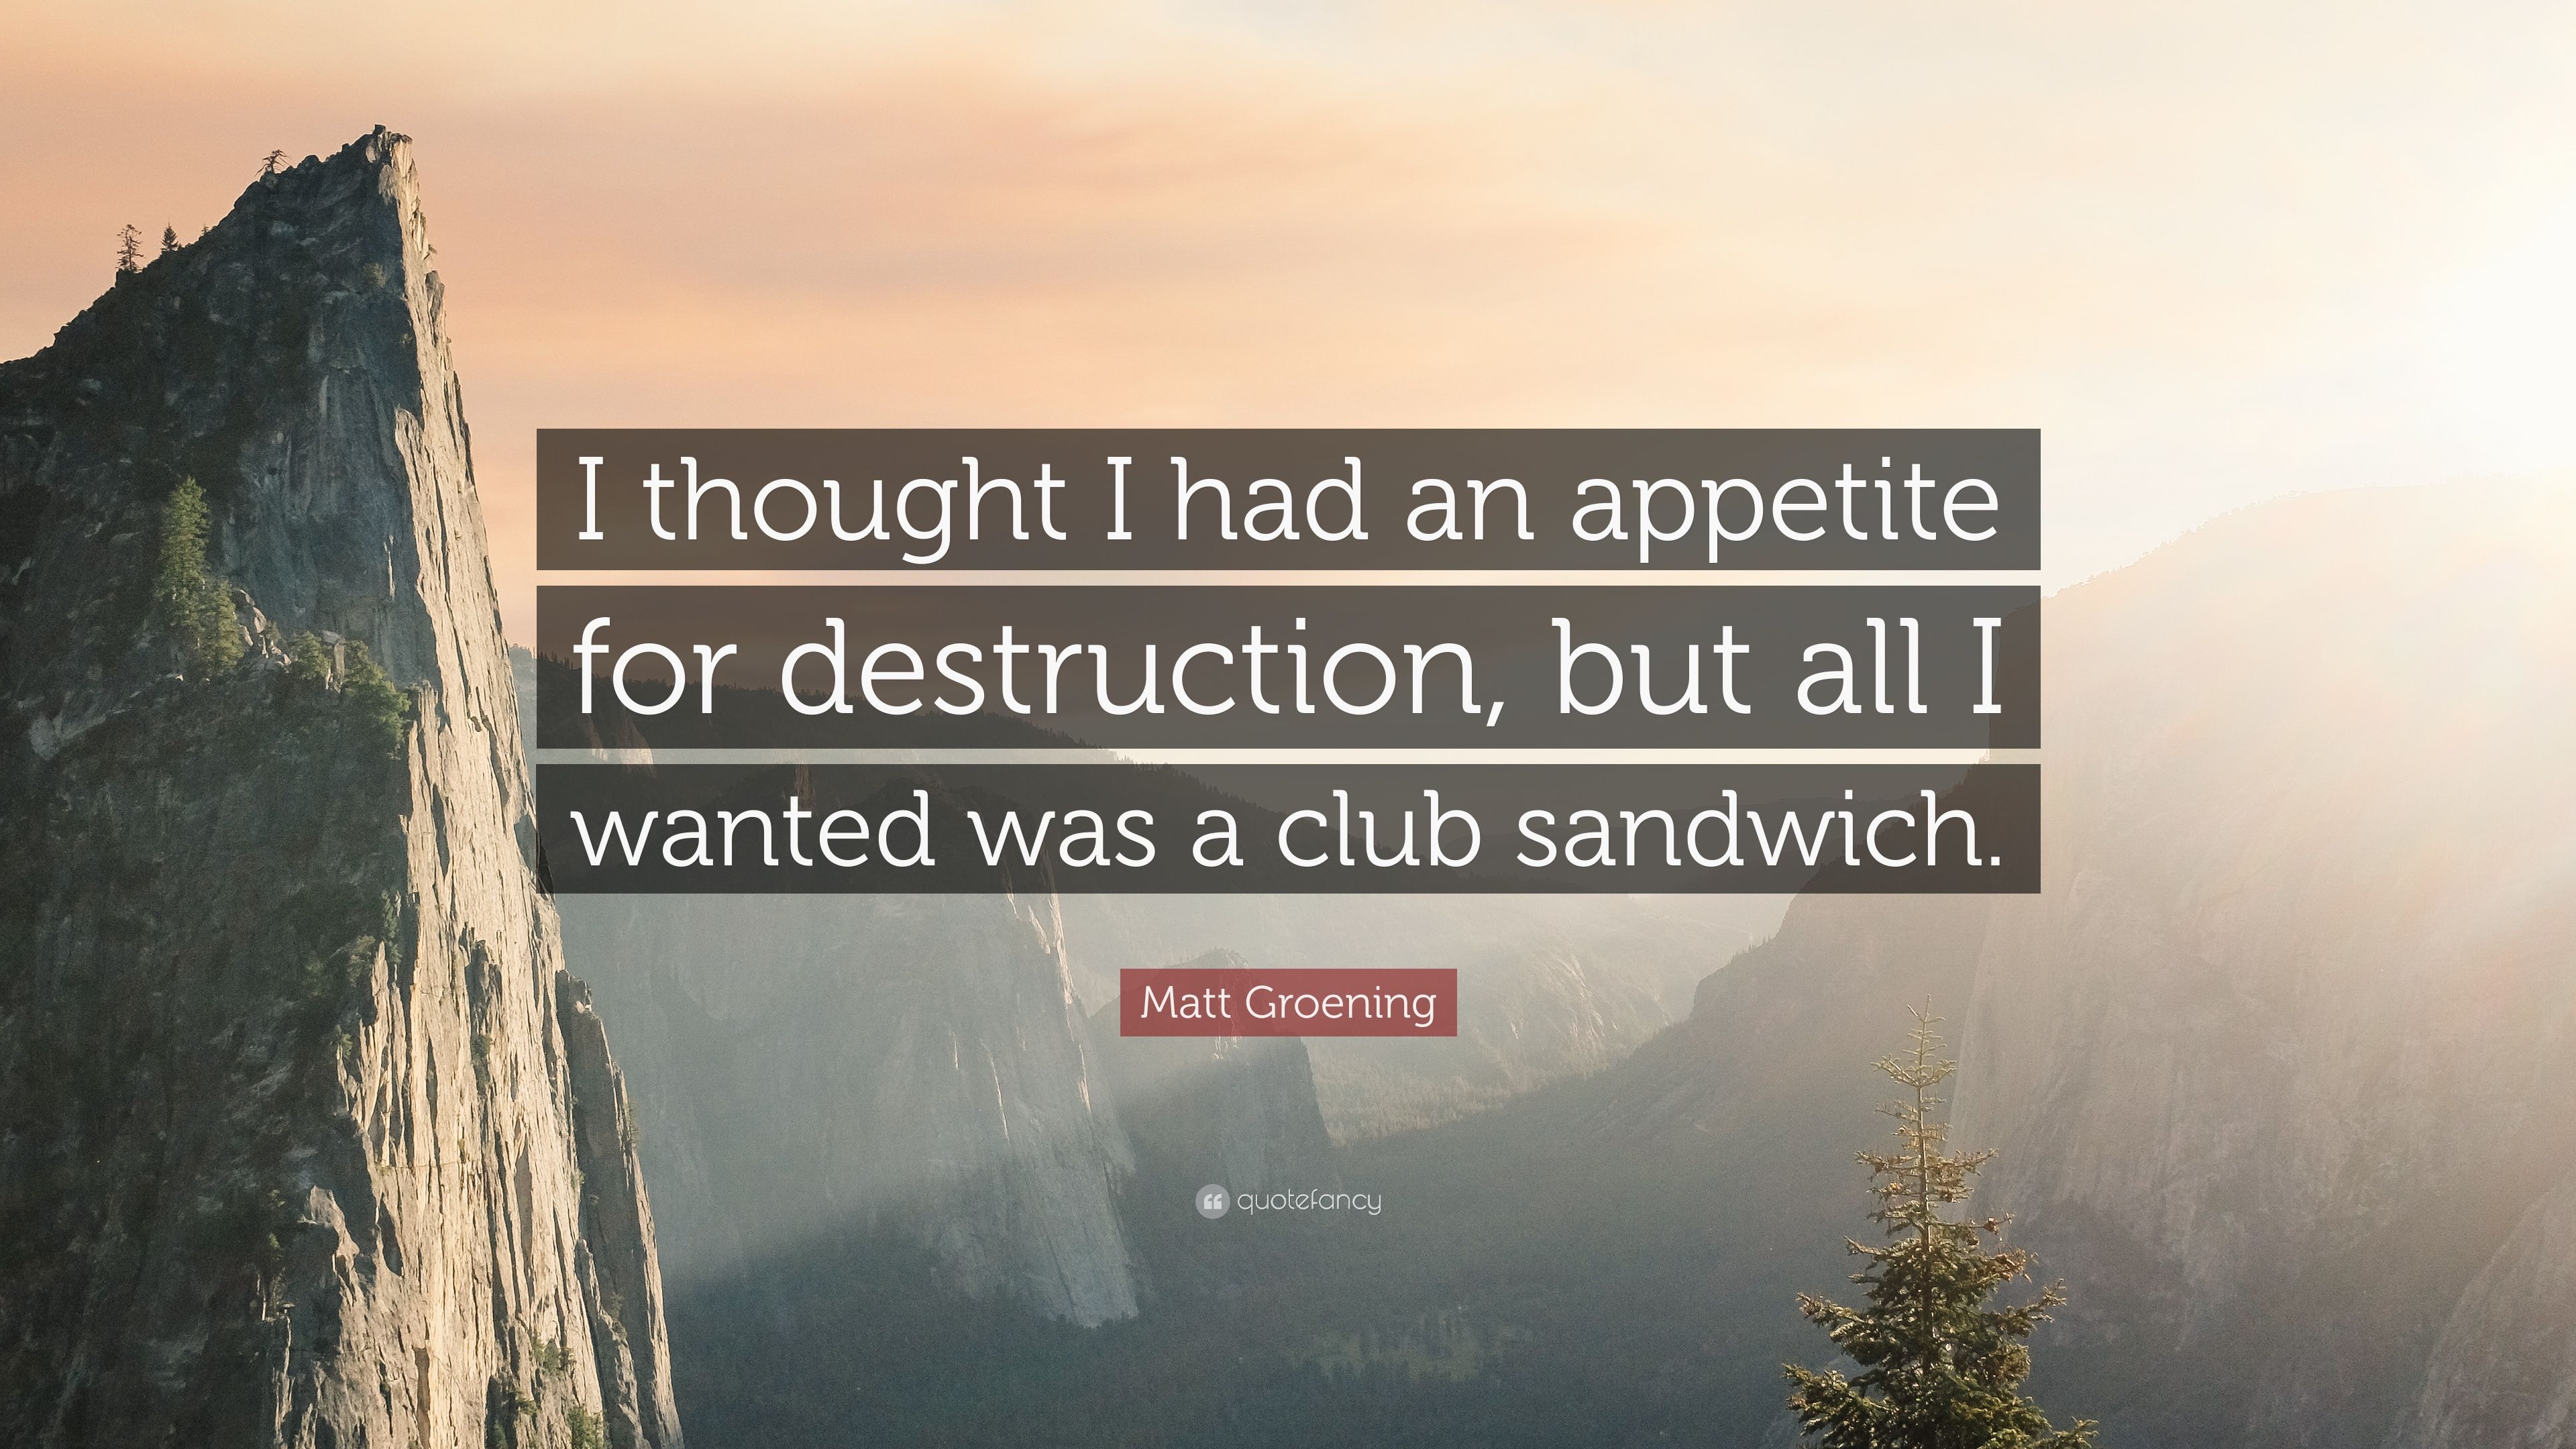 Matt Groening Quote: “I thought I had an appetite for destruction, but all I wanted was a club sandwich.” (7 wallpaper)